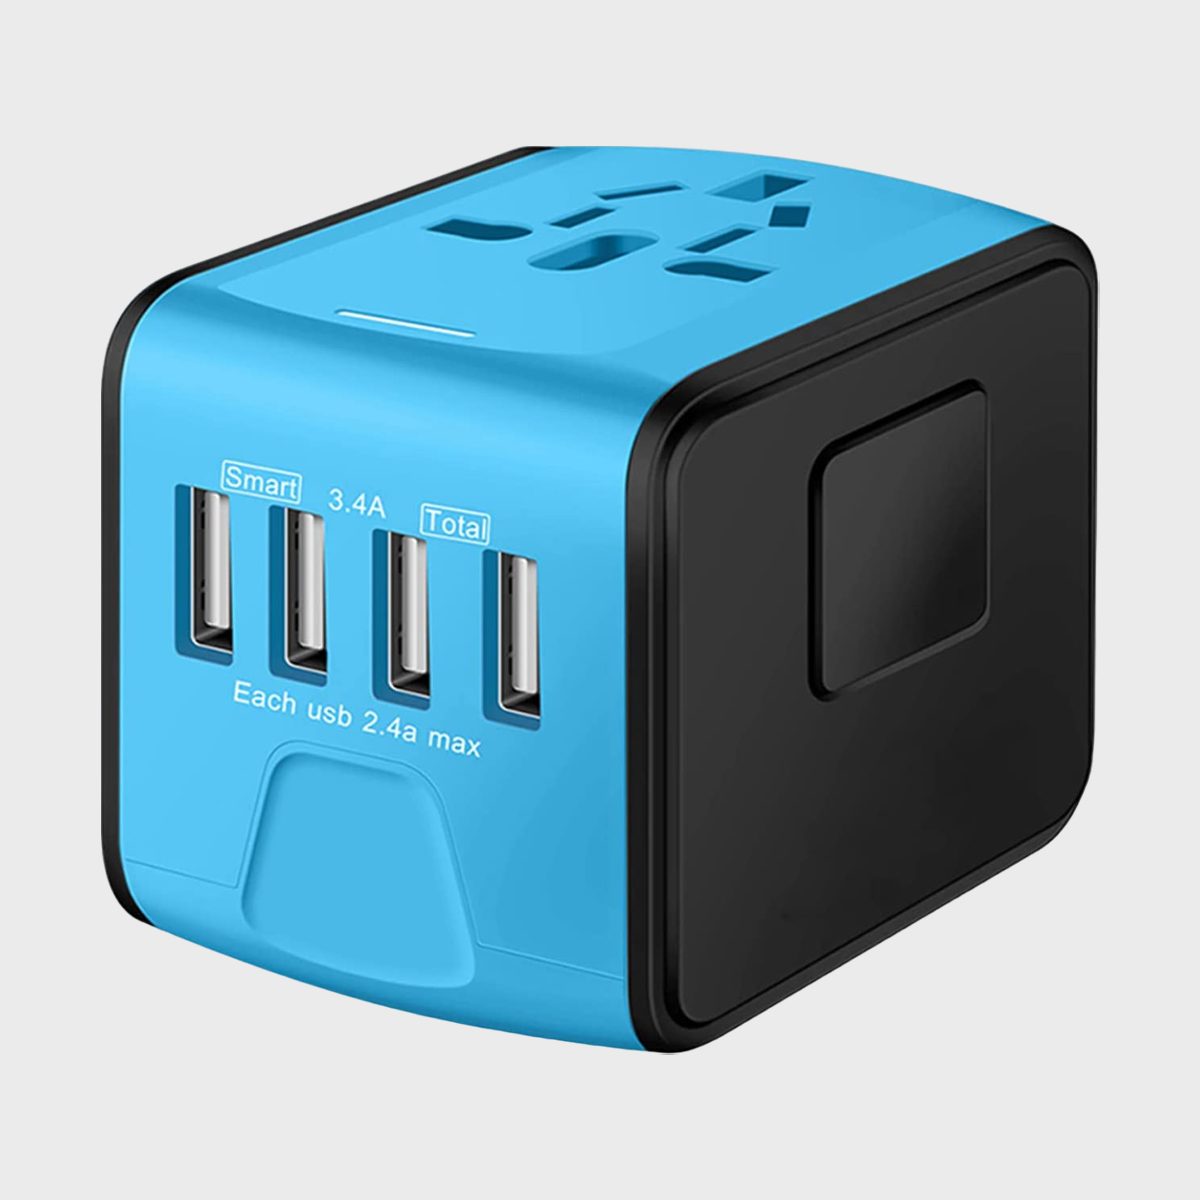 <p>Depending on which cruise line you're sailing, the cabin may not have the same outlets as the United States, and it most likely won't have USB ports either. That's why my "what to pack for a cruise" list has some crossover with my "<a href="https://www.rd.com/list/things-never-to-forget-when-traveling-overseas/" rel="noopener noreferrer">things to never forget when traveling overseas</a>" list. My universal <a href="https://www.amazon.com/gp/product/B078M32R41/" rel="noopener">Saunorch power adapter</a>, which has settings that cover more than 150 countries all in one device is crucial.</p> <p>It is also helpful for any hotel stays or airport delays before and after an overseas cruise. The four USB ports come in handy for simultaneously charging a phone, tablet, camera equipment and portable charger too.</p> <p class="listicle-page__cta-button-shop"><a class="shop-btn" href="https://www.amazon.com/gp/product/B078M32R41/">Shop Now</a></p>